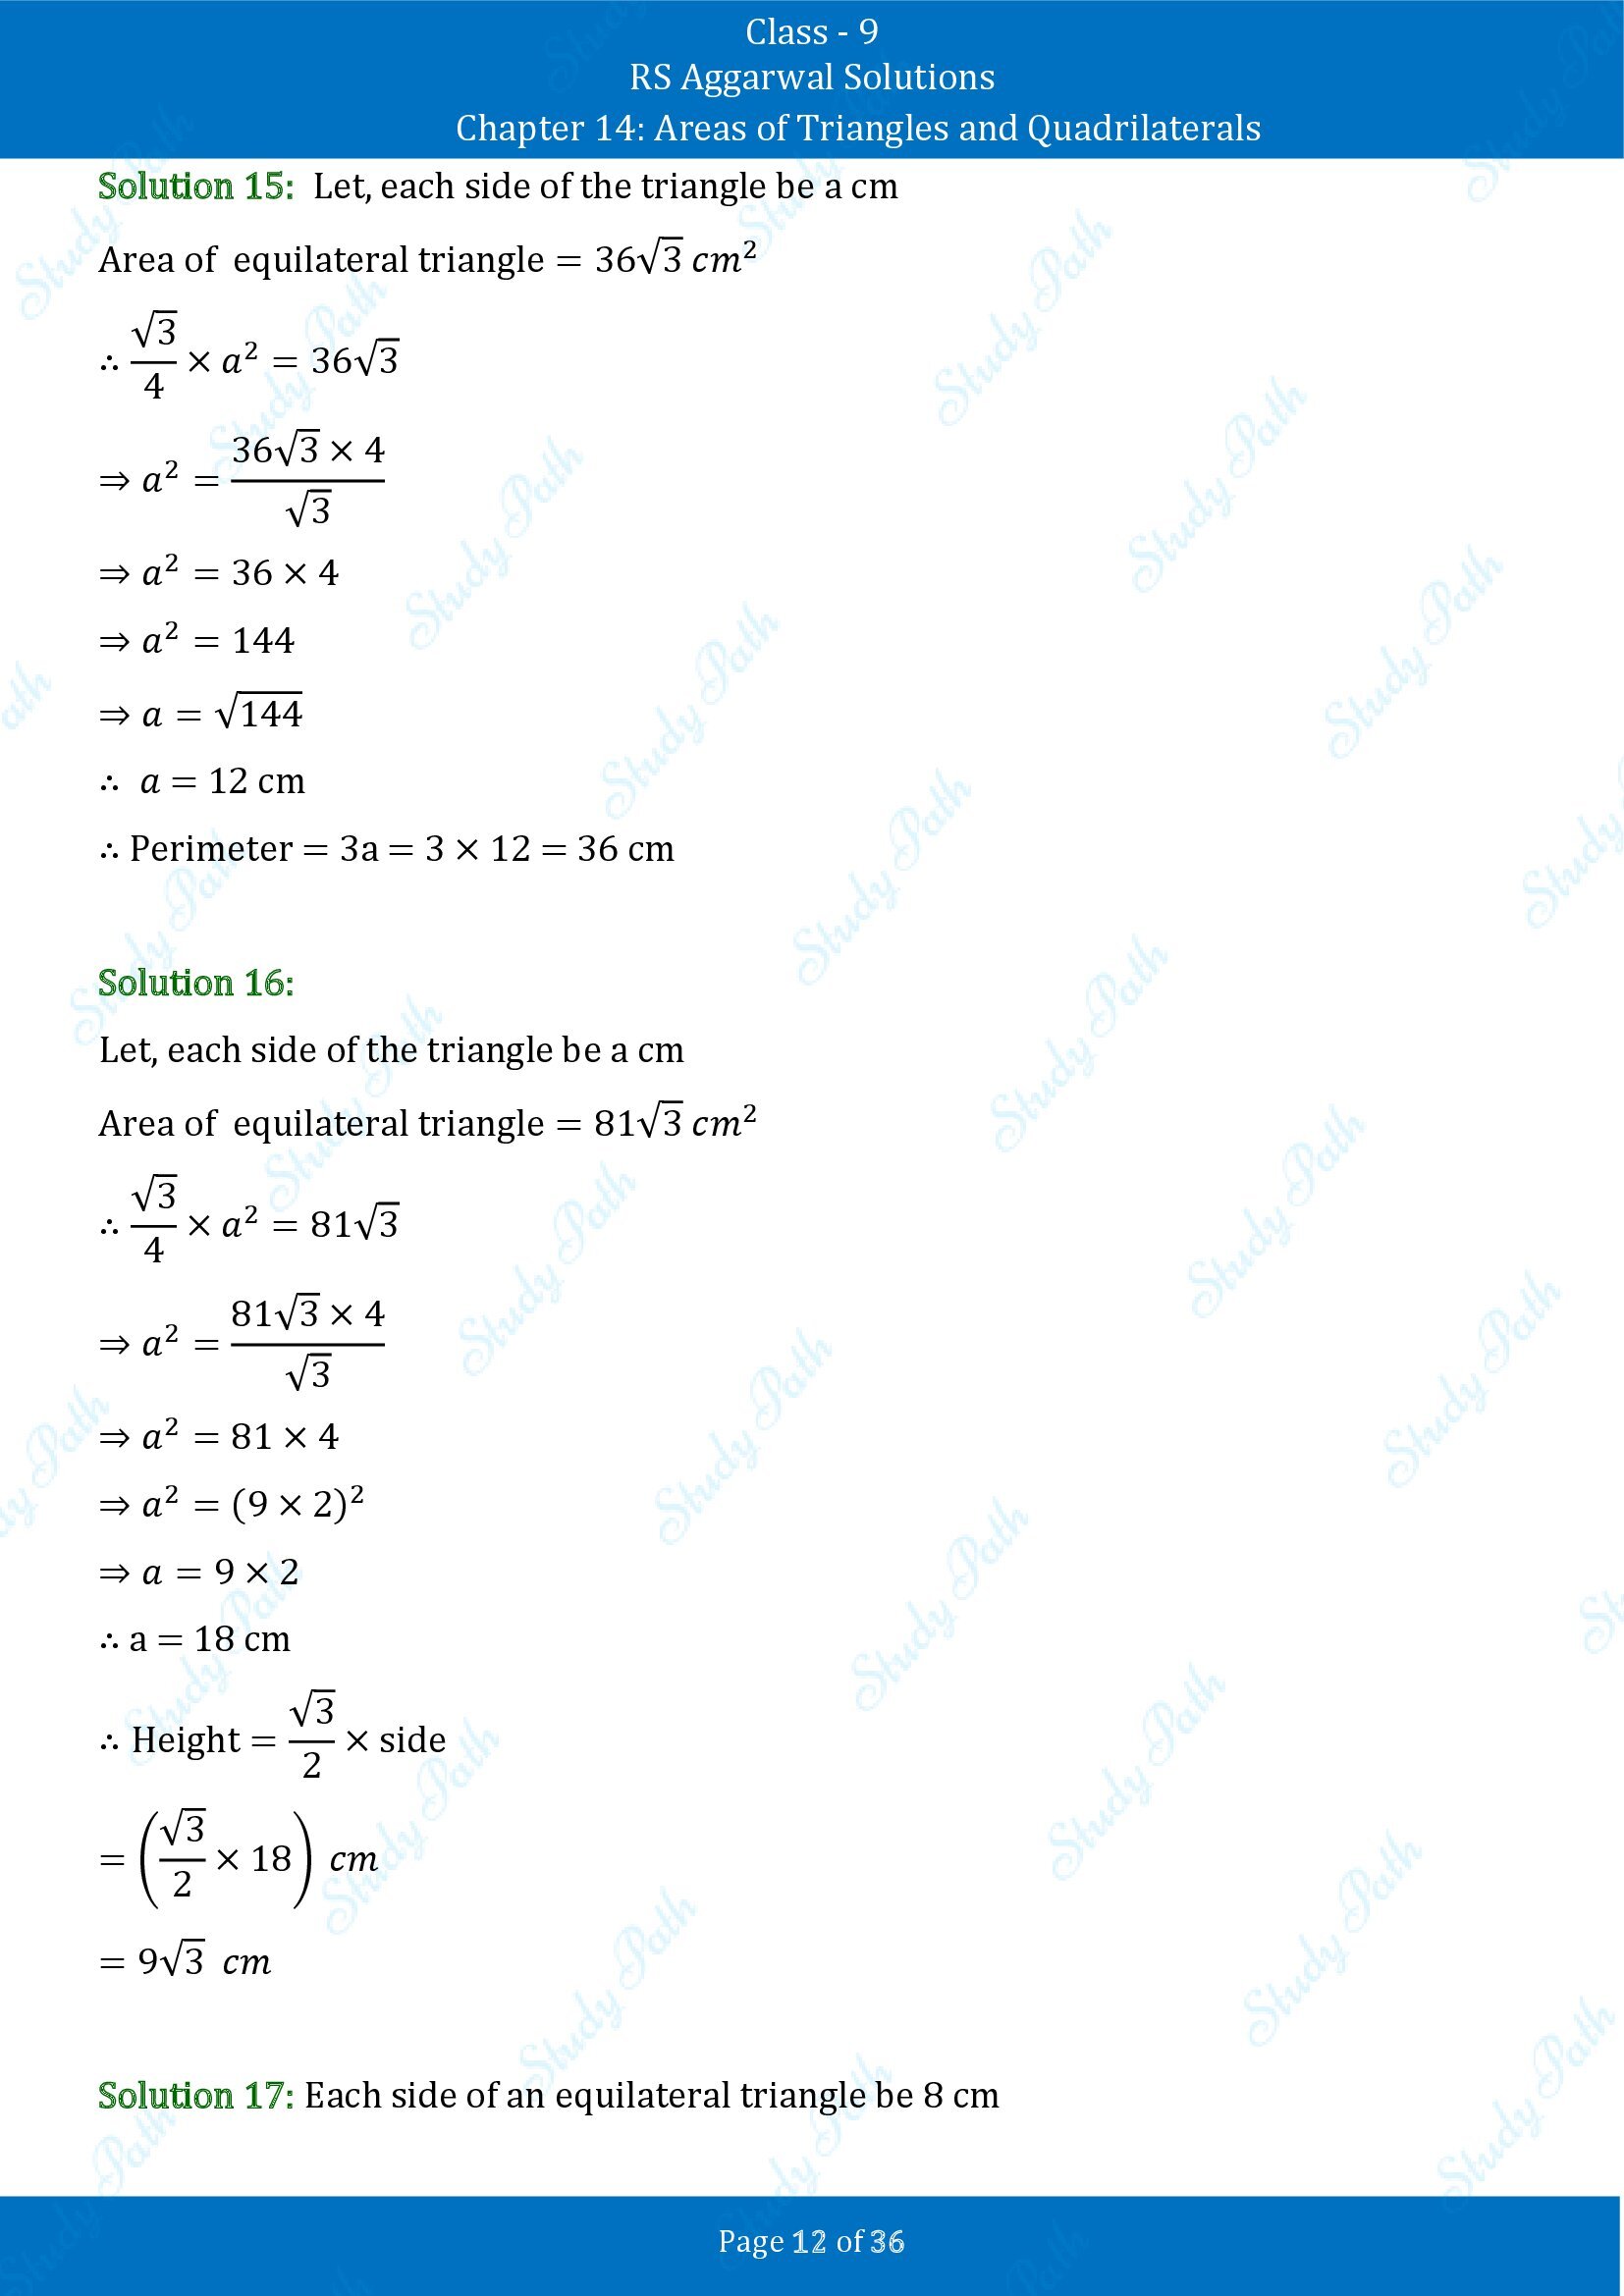 RS Aggarwal Solutions Class 9 Chapter 14 Areas of Triangles and Quadrilaterals Exercise 14 00012